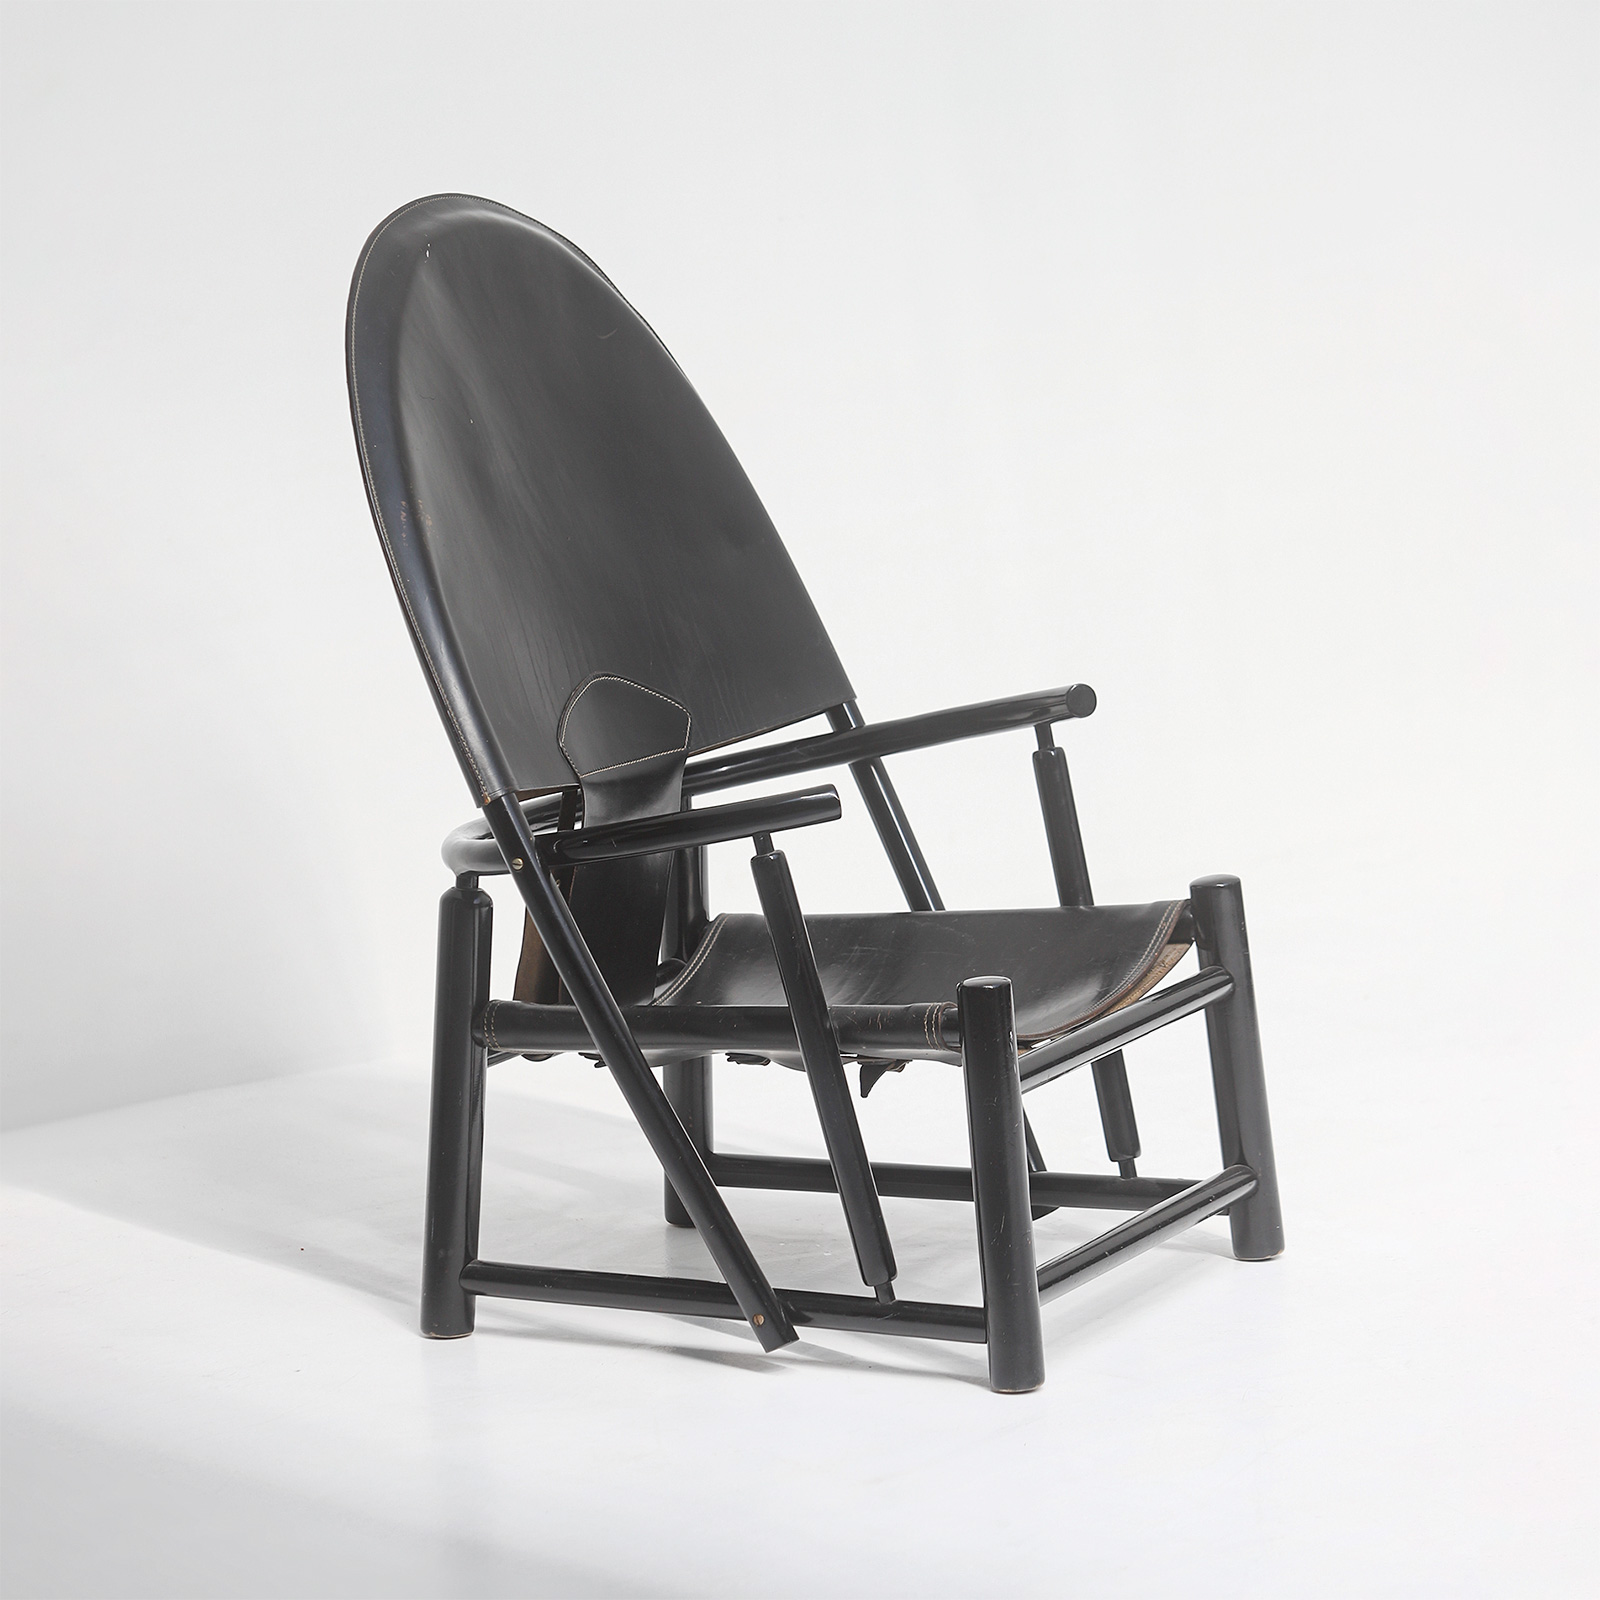 Hoop Chair By Piero Palange & Werther Toffoloni For Germa